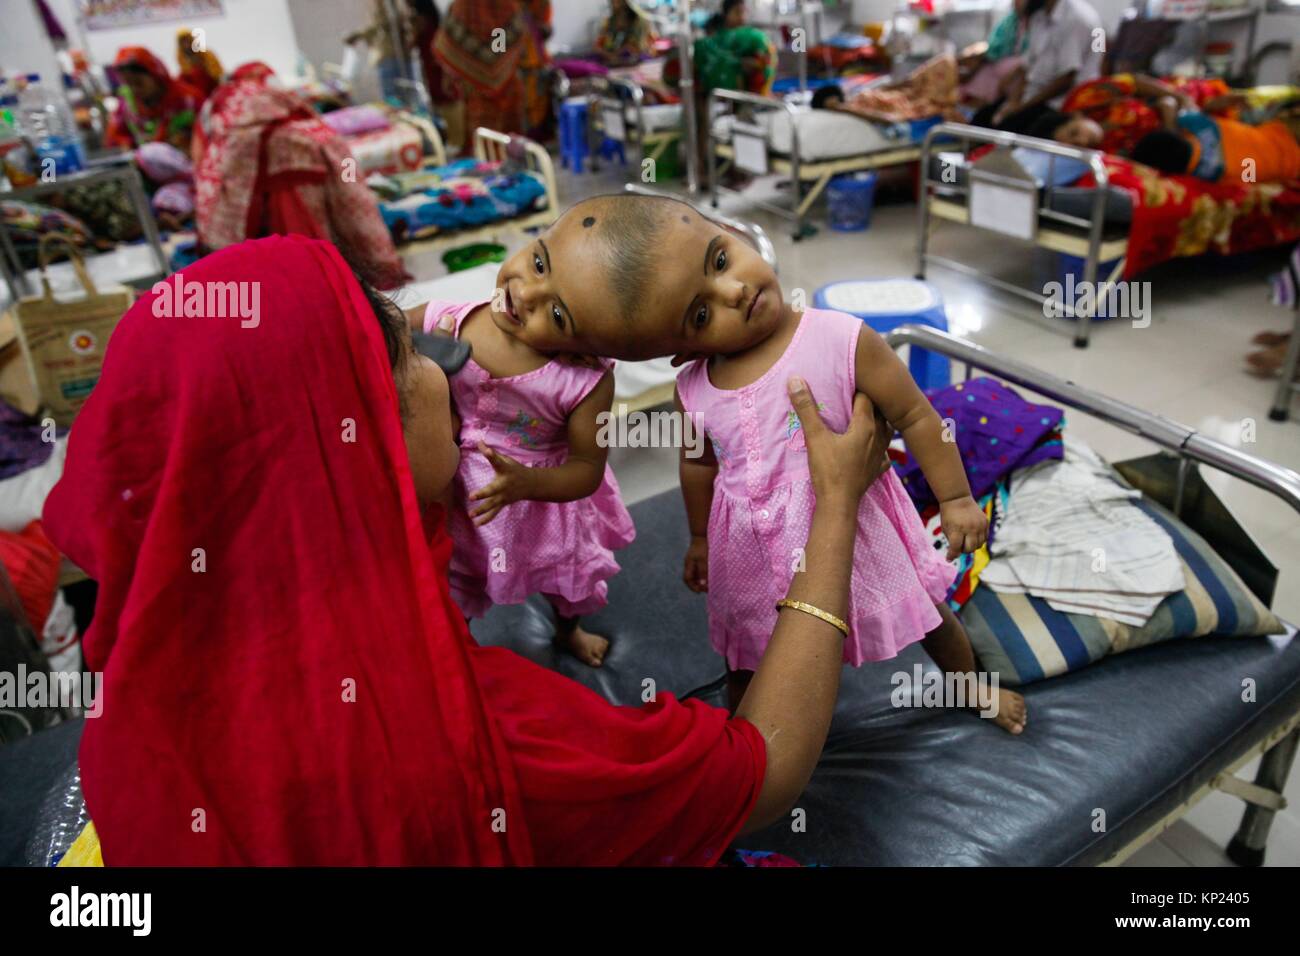 Bangladeshi conjoined baby girls twins Rabia and Rukia admitted in Hospital at Dhaka on July 24, 2017. Delivered by caesarean at the PDC Clinic in Stock Photo